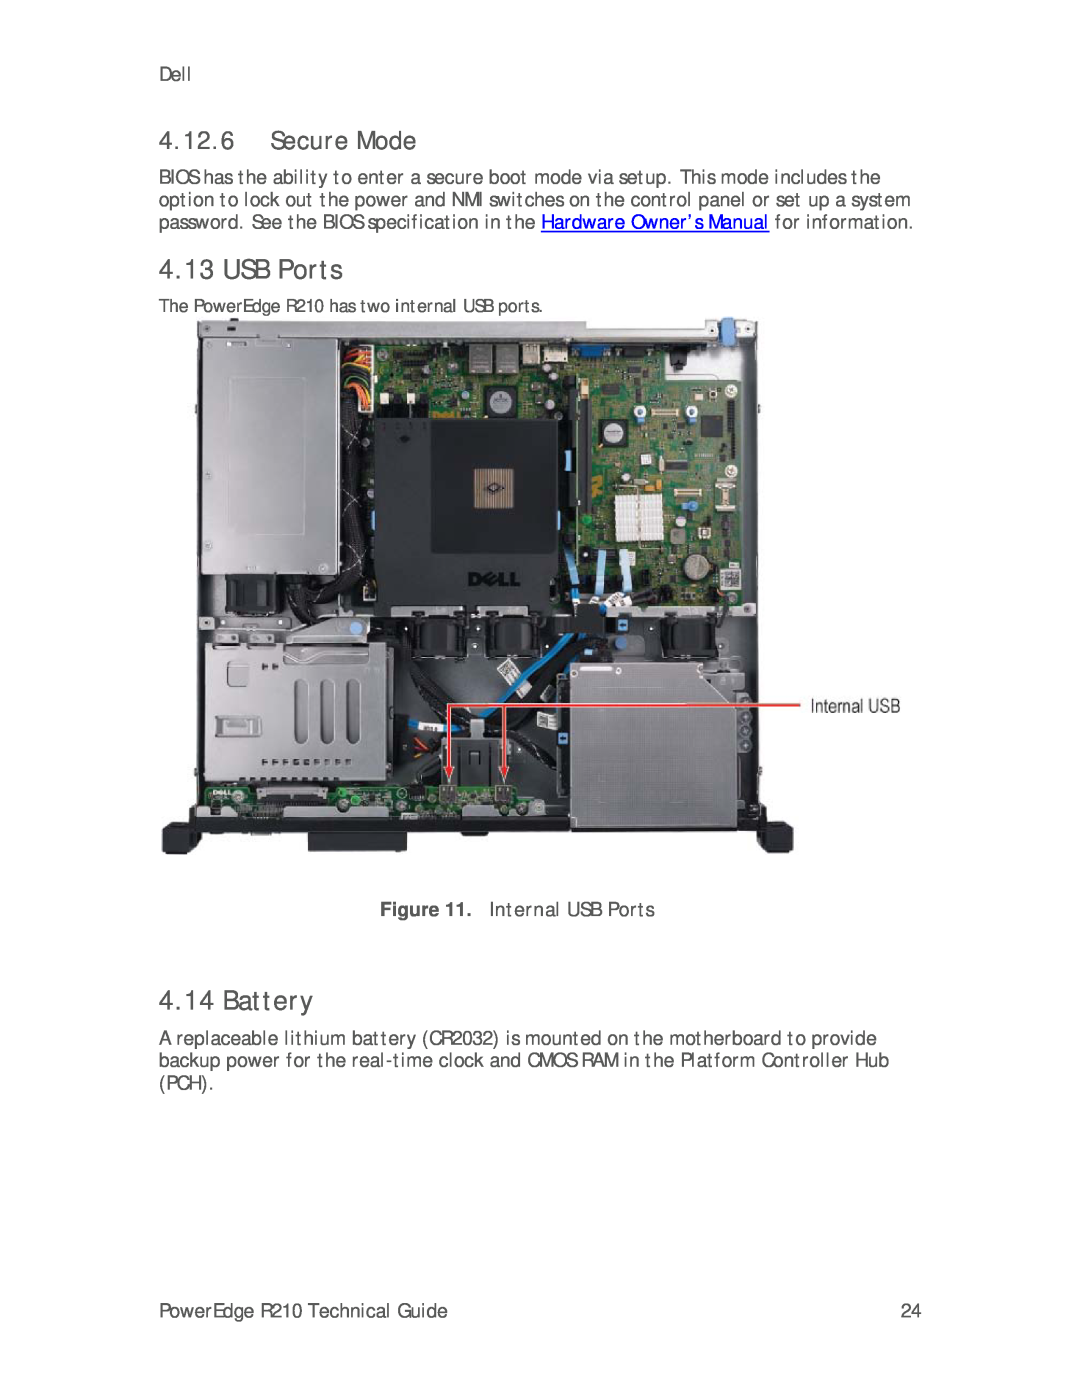 Dell R210 manual USB Ports, Battery, Secure Mode 